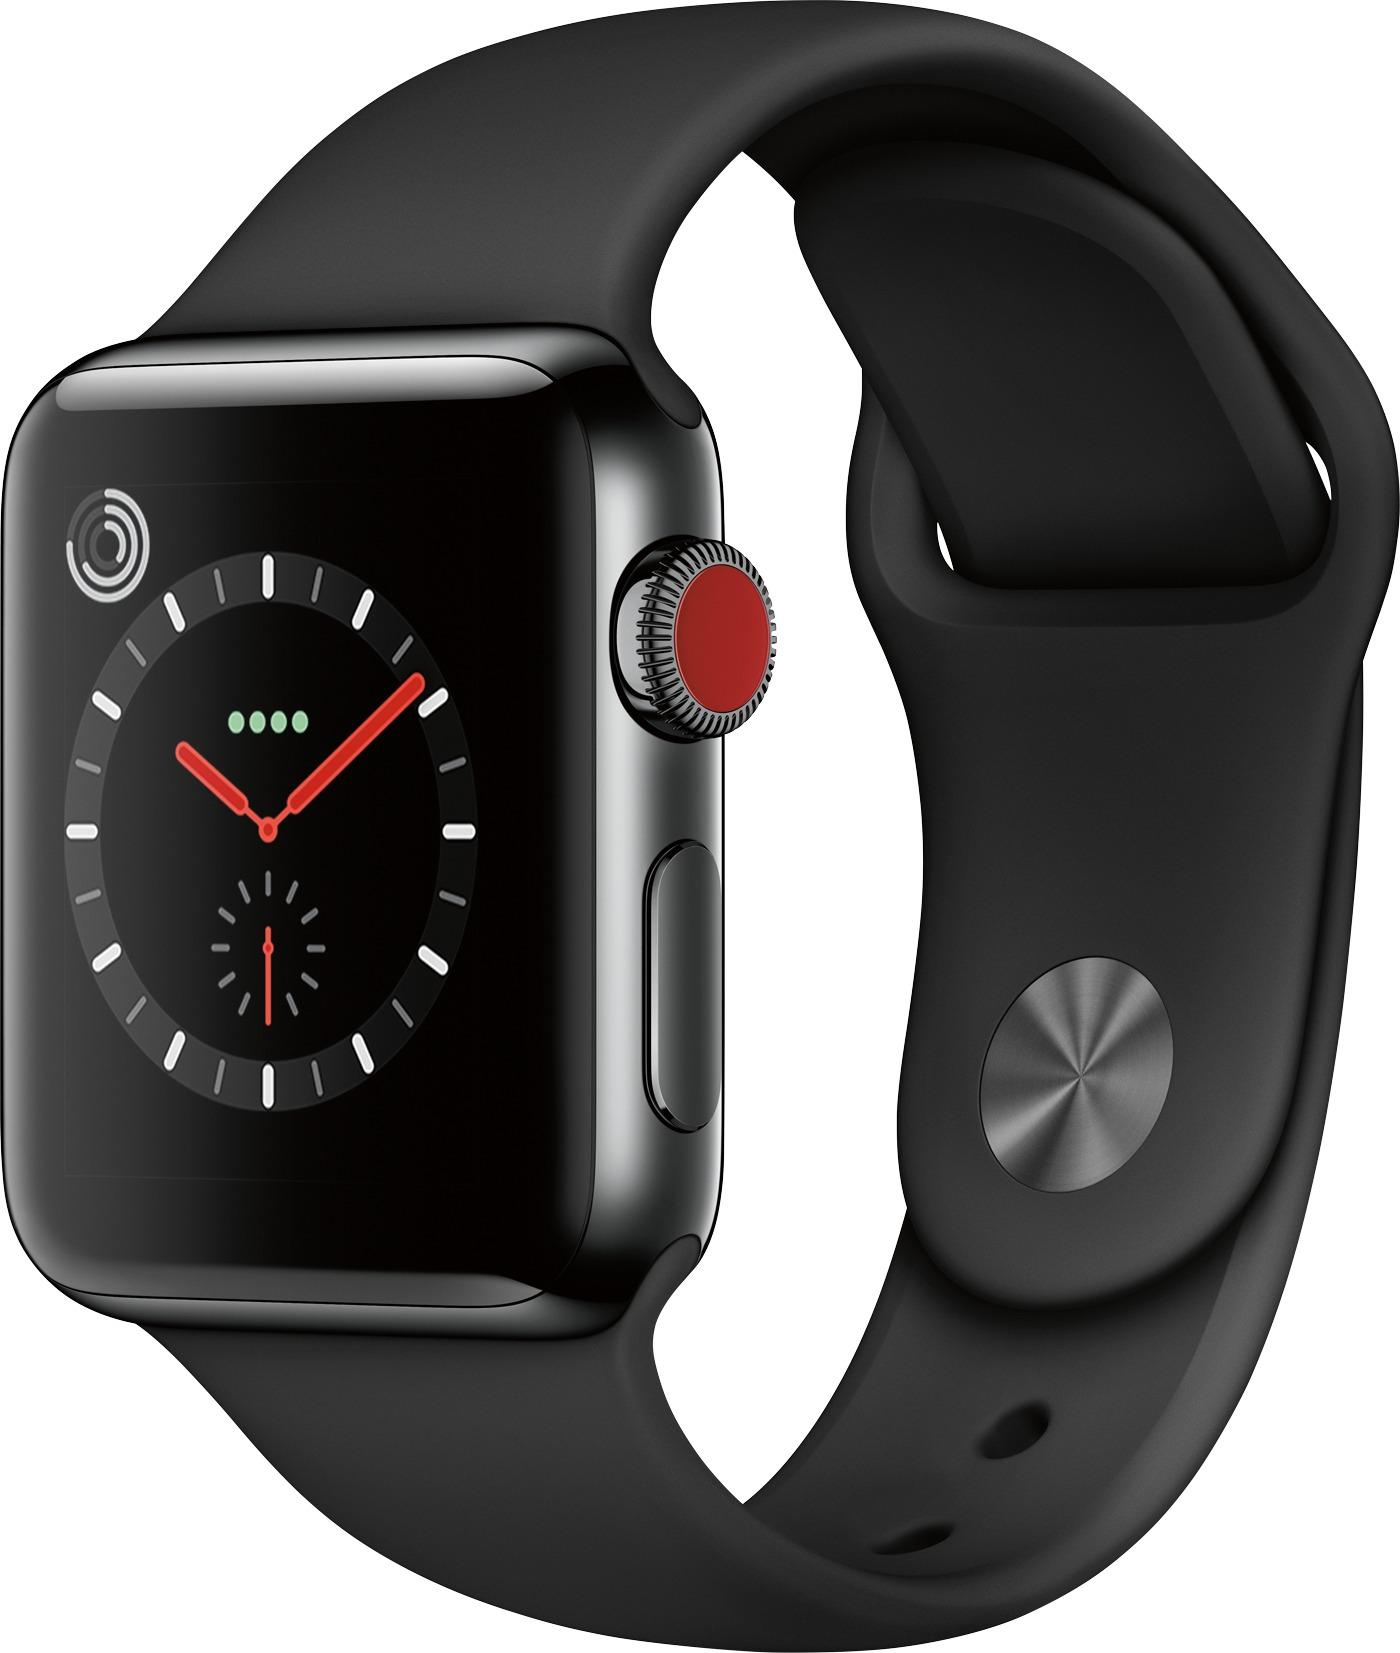 Questions and Answers: Apple Watch Series 3 (GPS + Cellular) 38mm Space Apple Watch Series 3 Stainless Steel Case